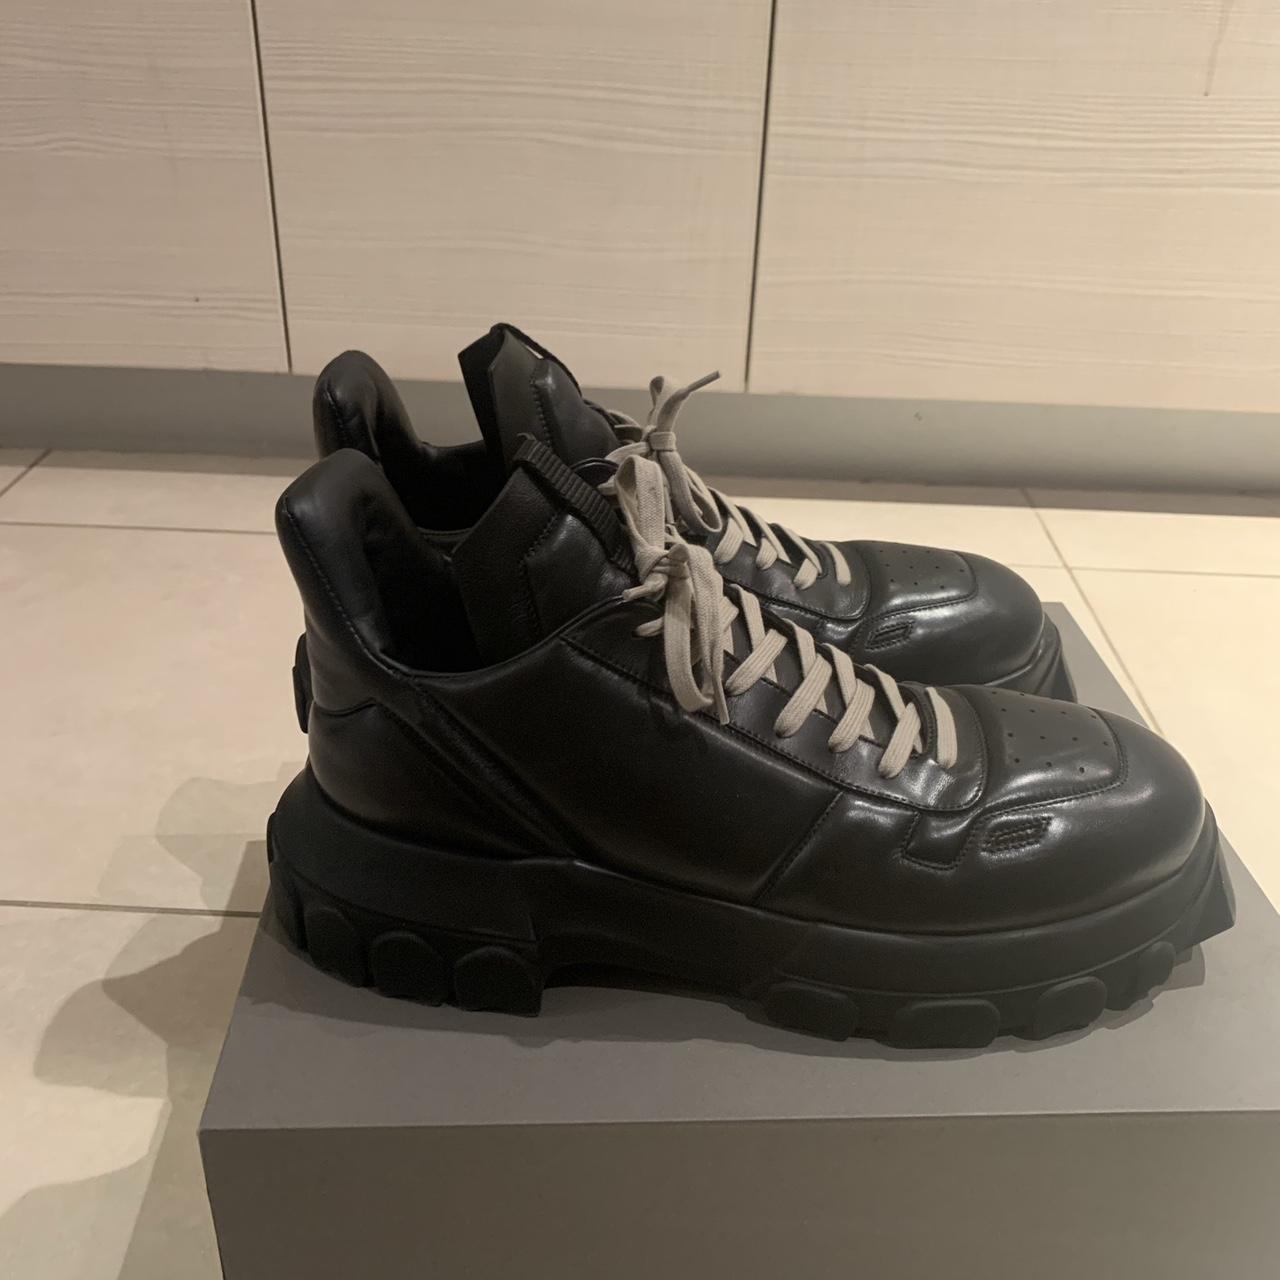 OPEN TO OFFERS! Brand new Rick Owens Tractor sole... - Depop